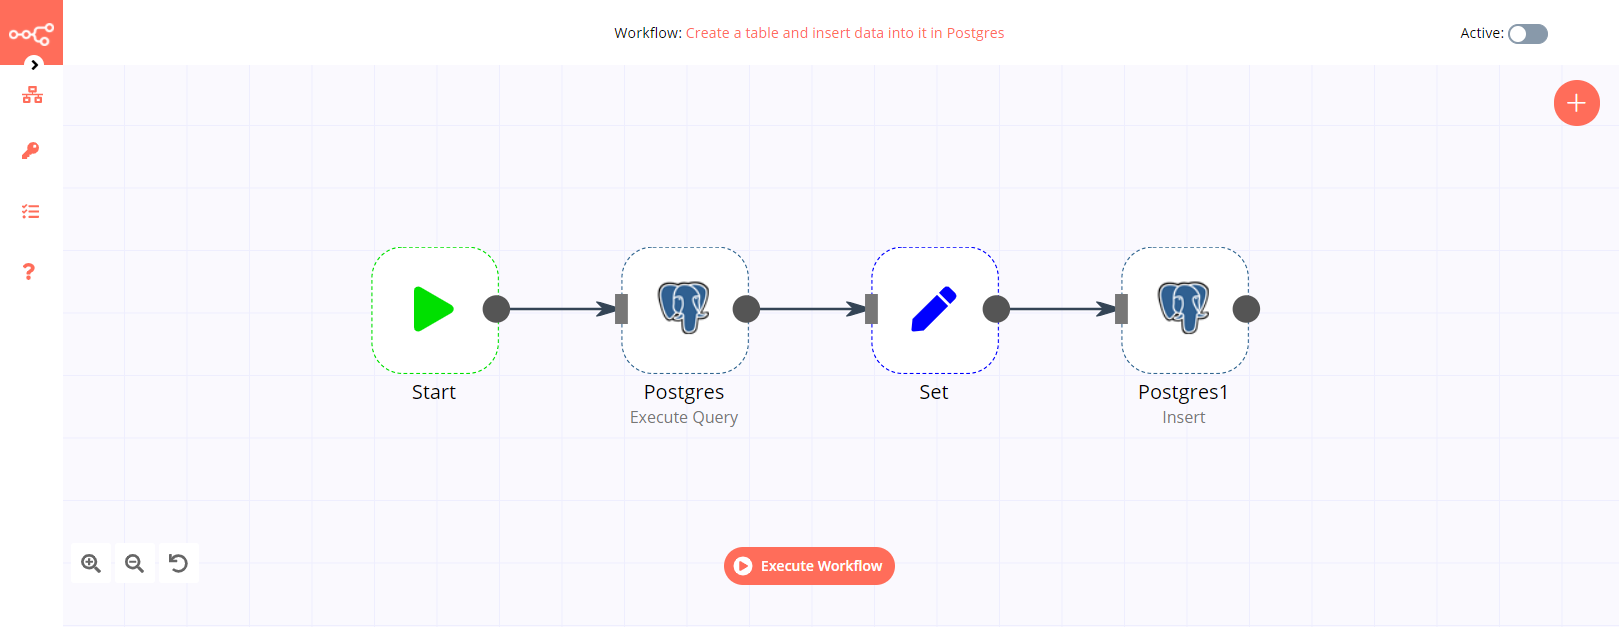 A workflow with the Postgres node